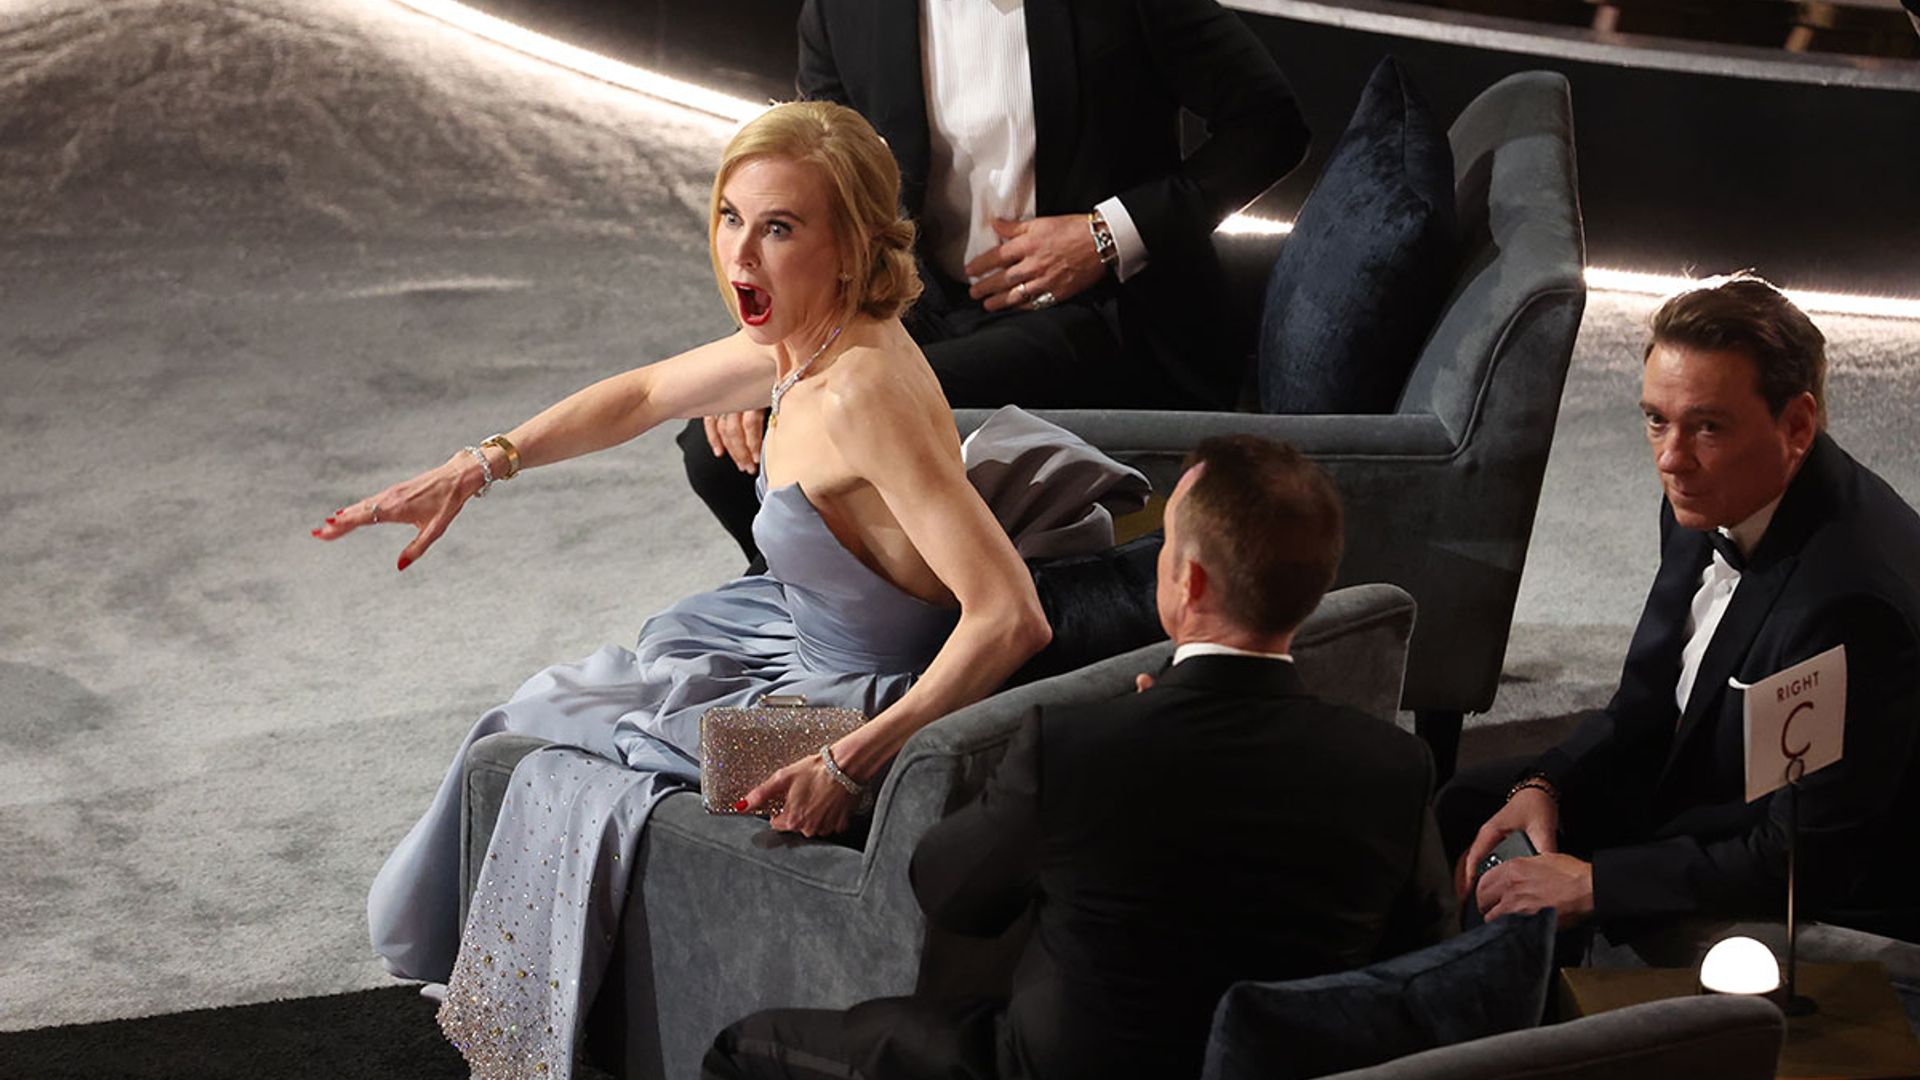 The truth behind Nicole Kidman's reaction to Will Smith slapping Chris Rock